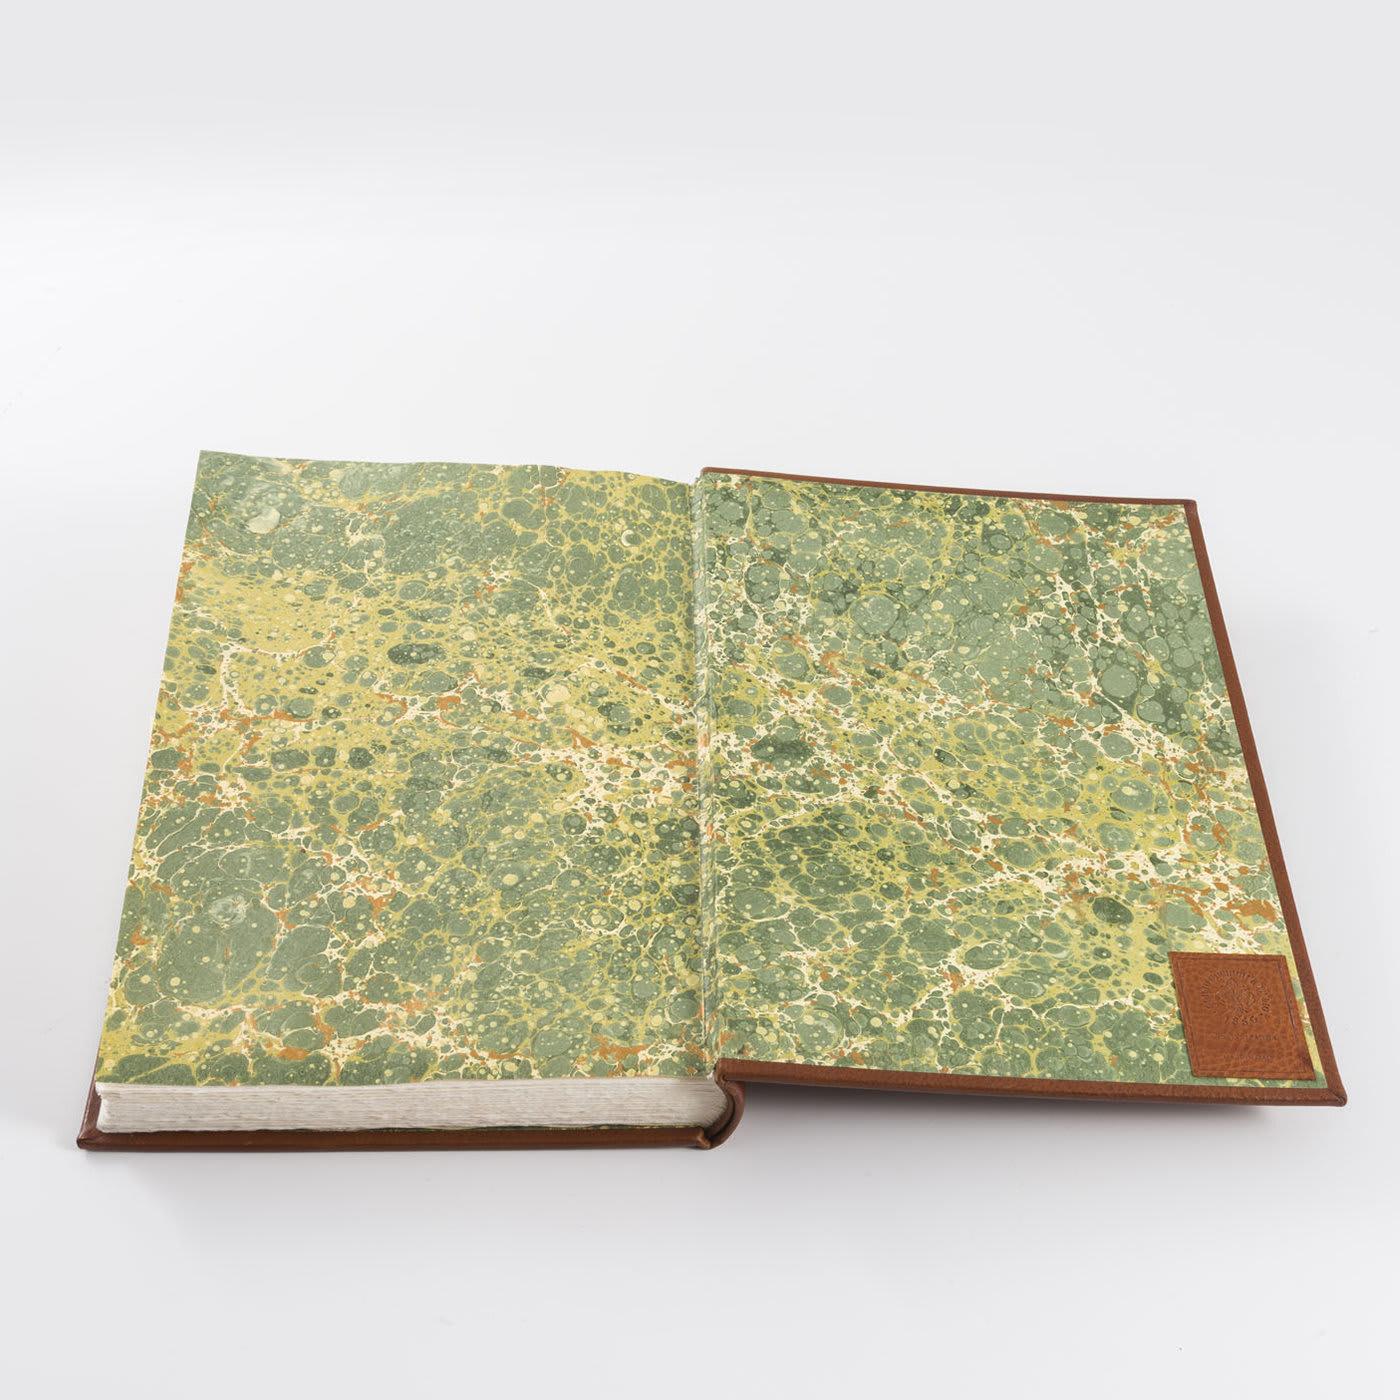 This soft, full-grain leather recipe book features lined, ivory-colored, acid-free paper. Its cover is embossed with the words My Recipes and the user's monogram or name can be added in gold lettering. Ivory-colored dust bag included. This item